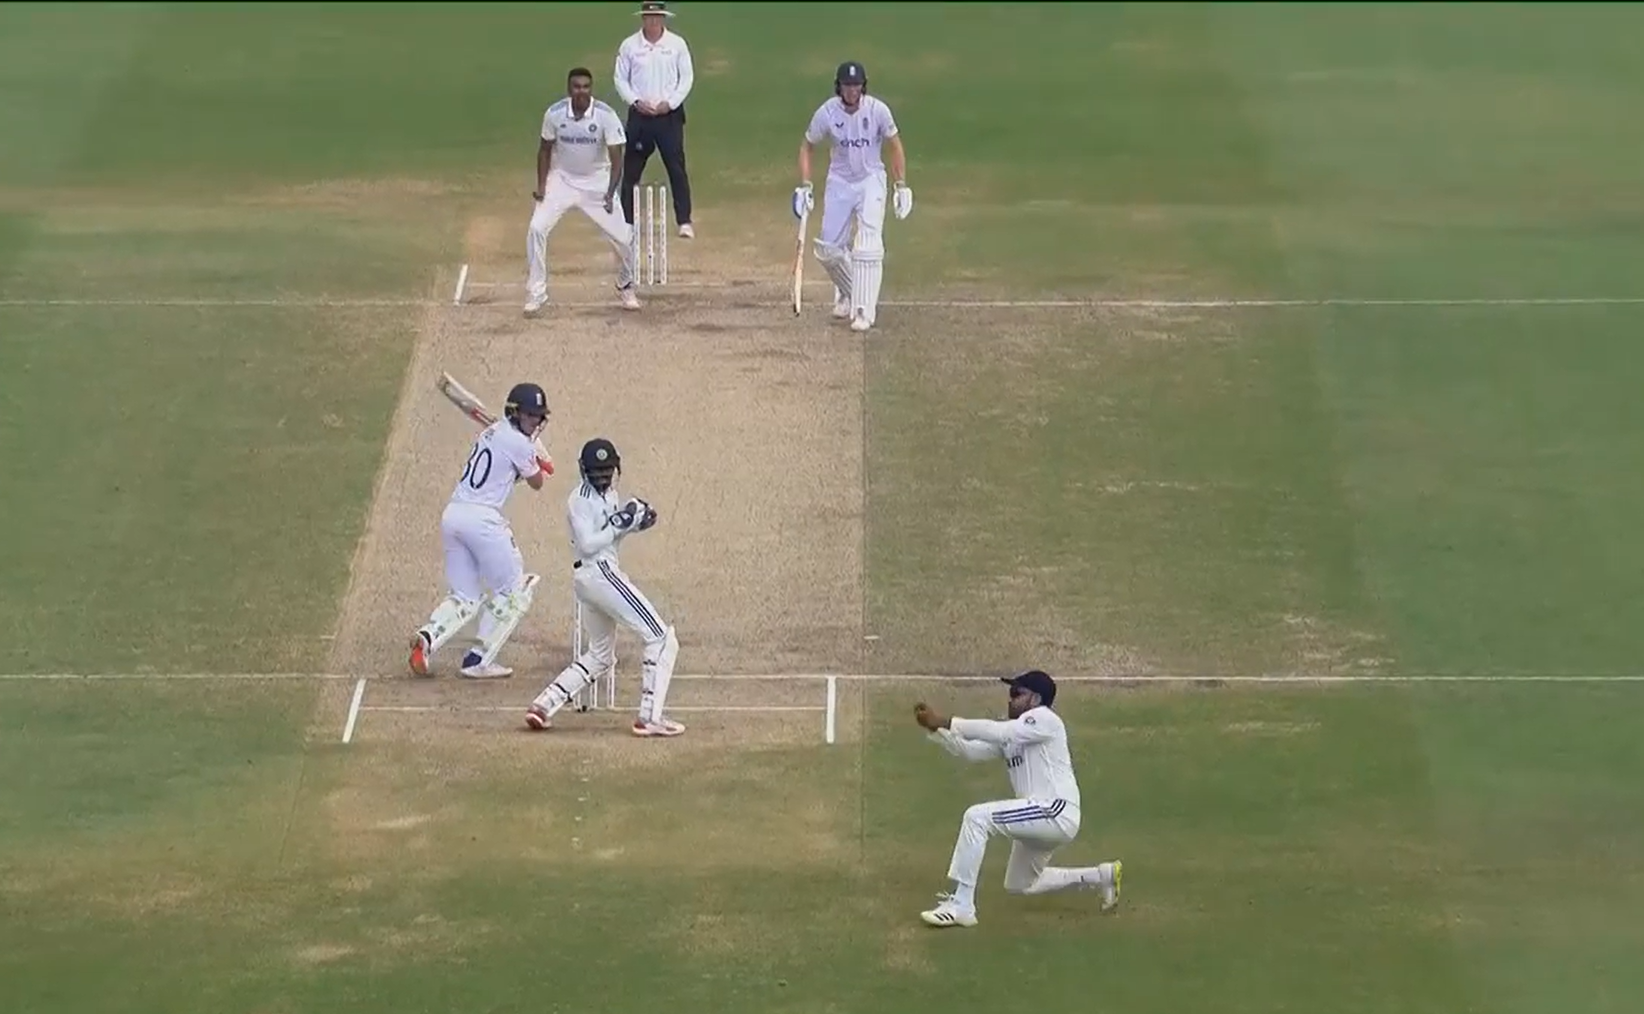 IND vs ENG: [WATCH] Rohit Sharma Grabs A Sharp Catch To dismiss Ollie Pope